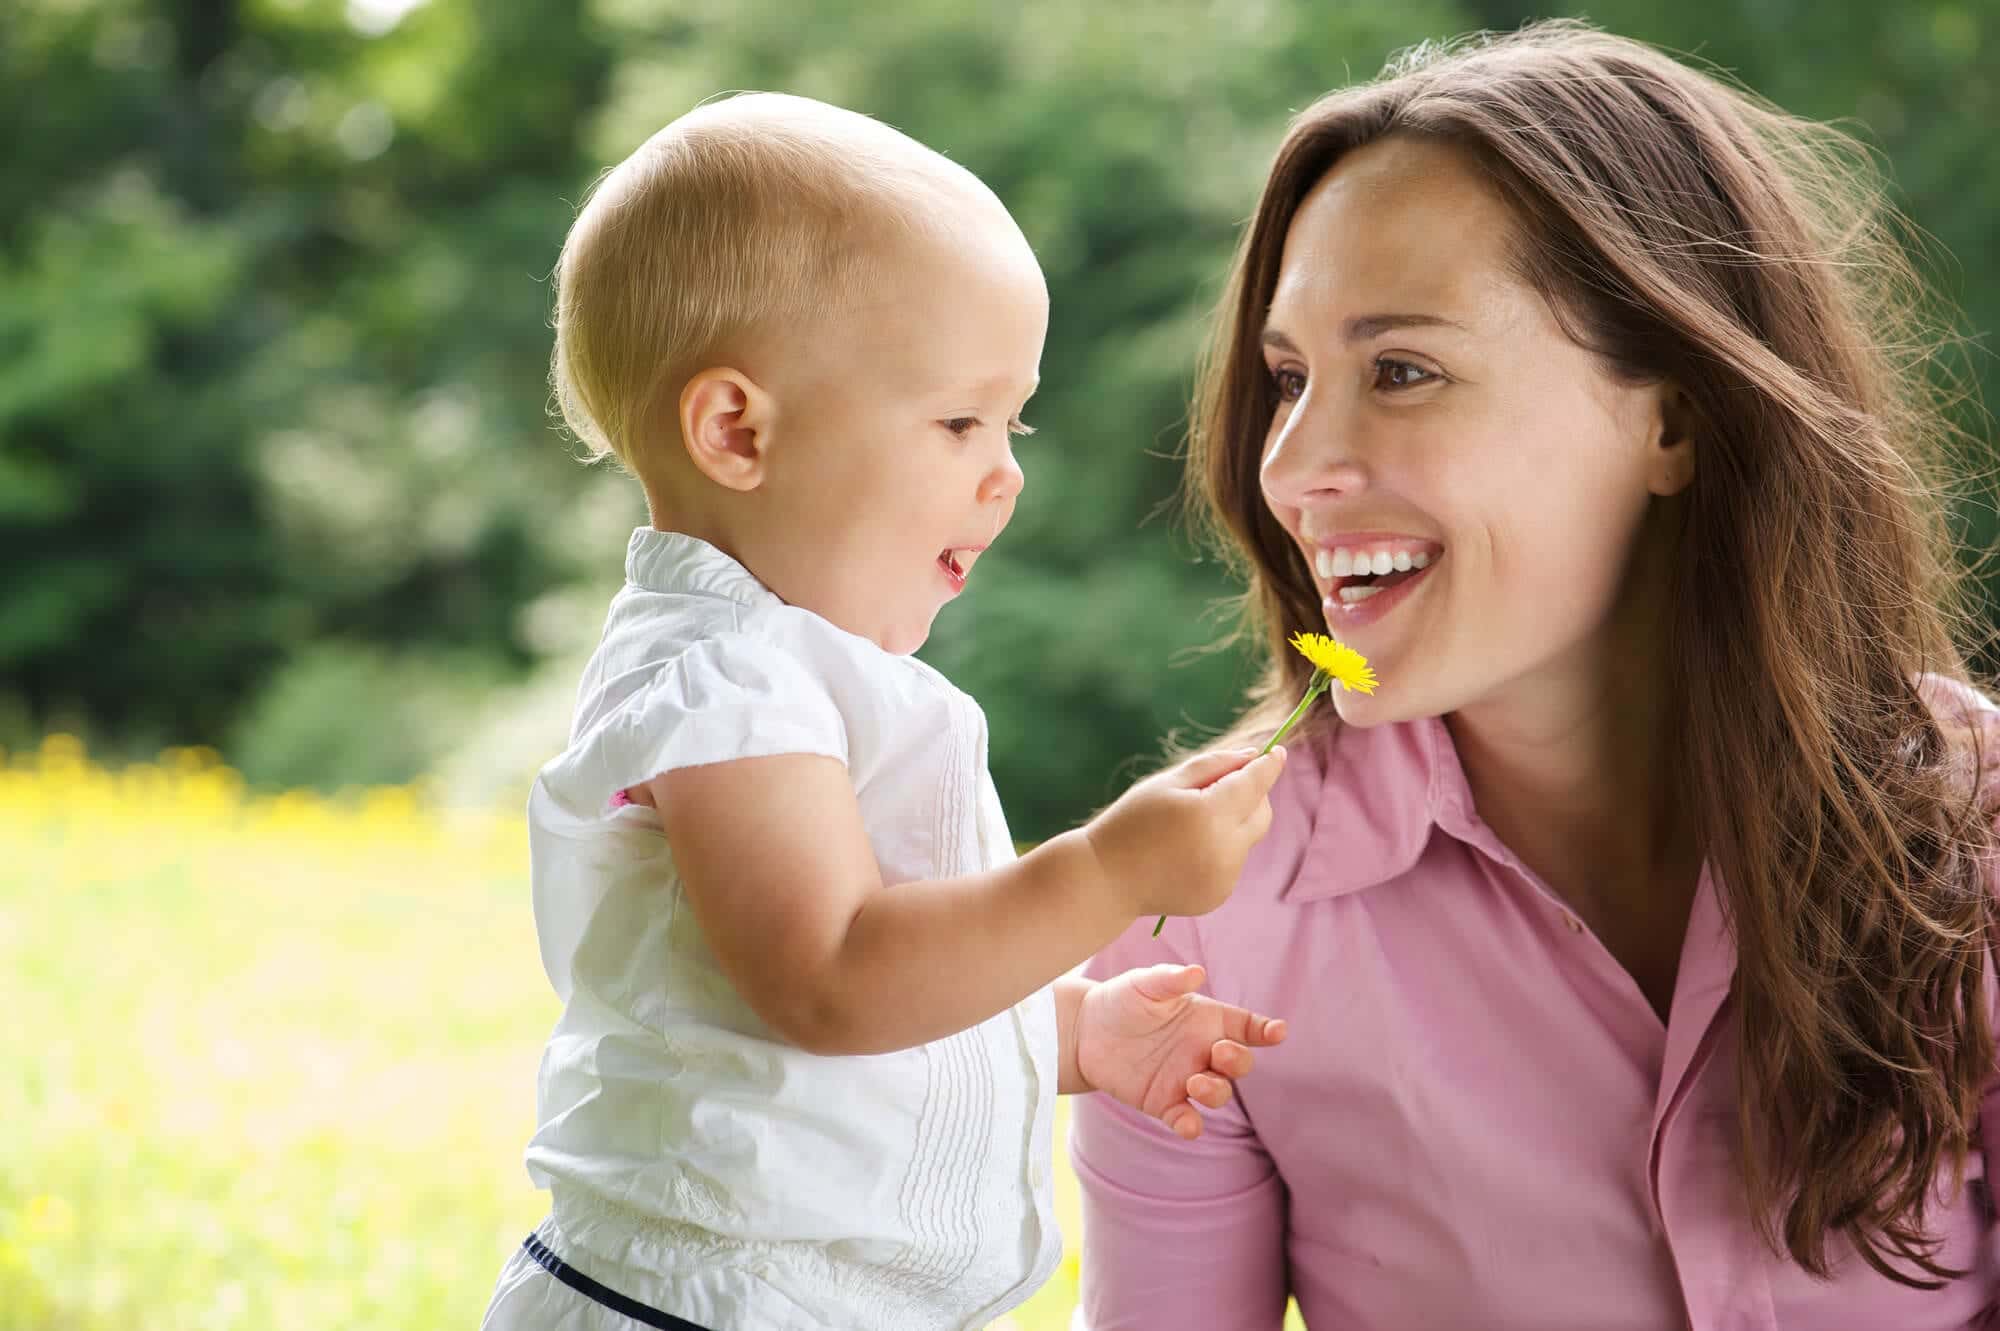 mom opposing 50-50 parenting schedule for infant